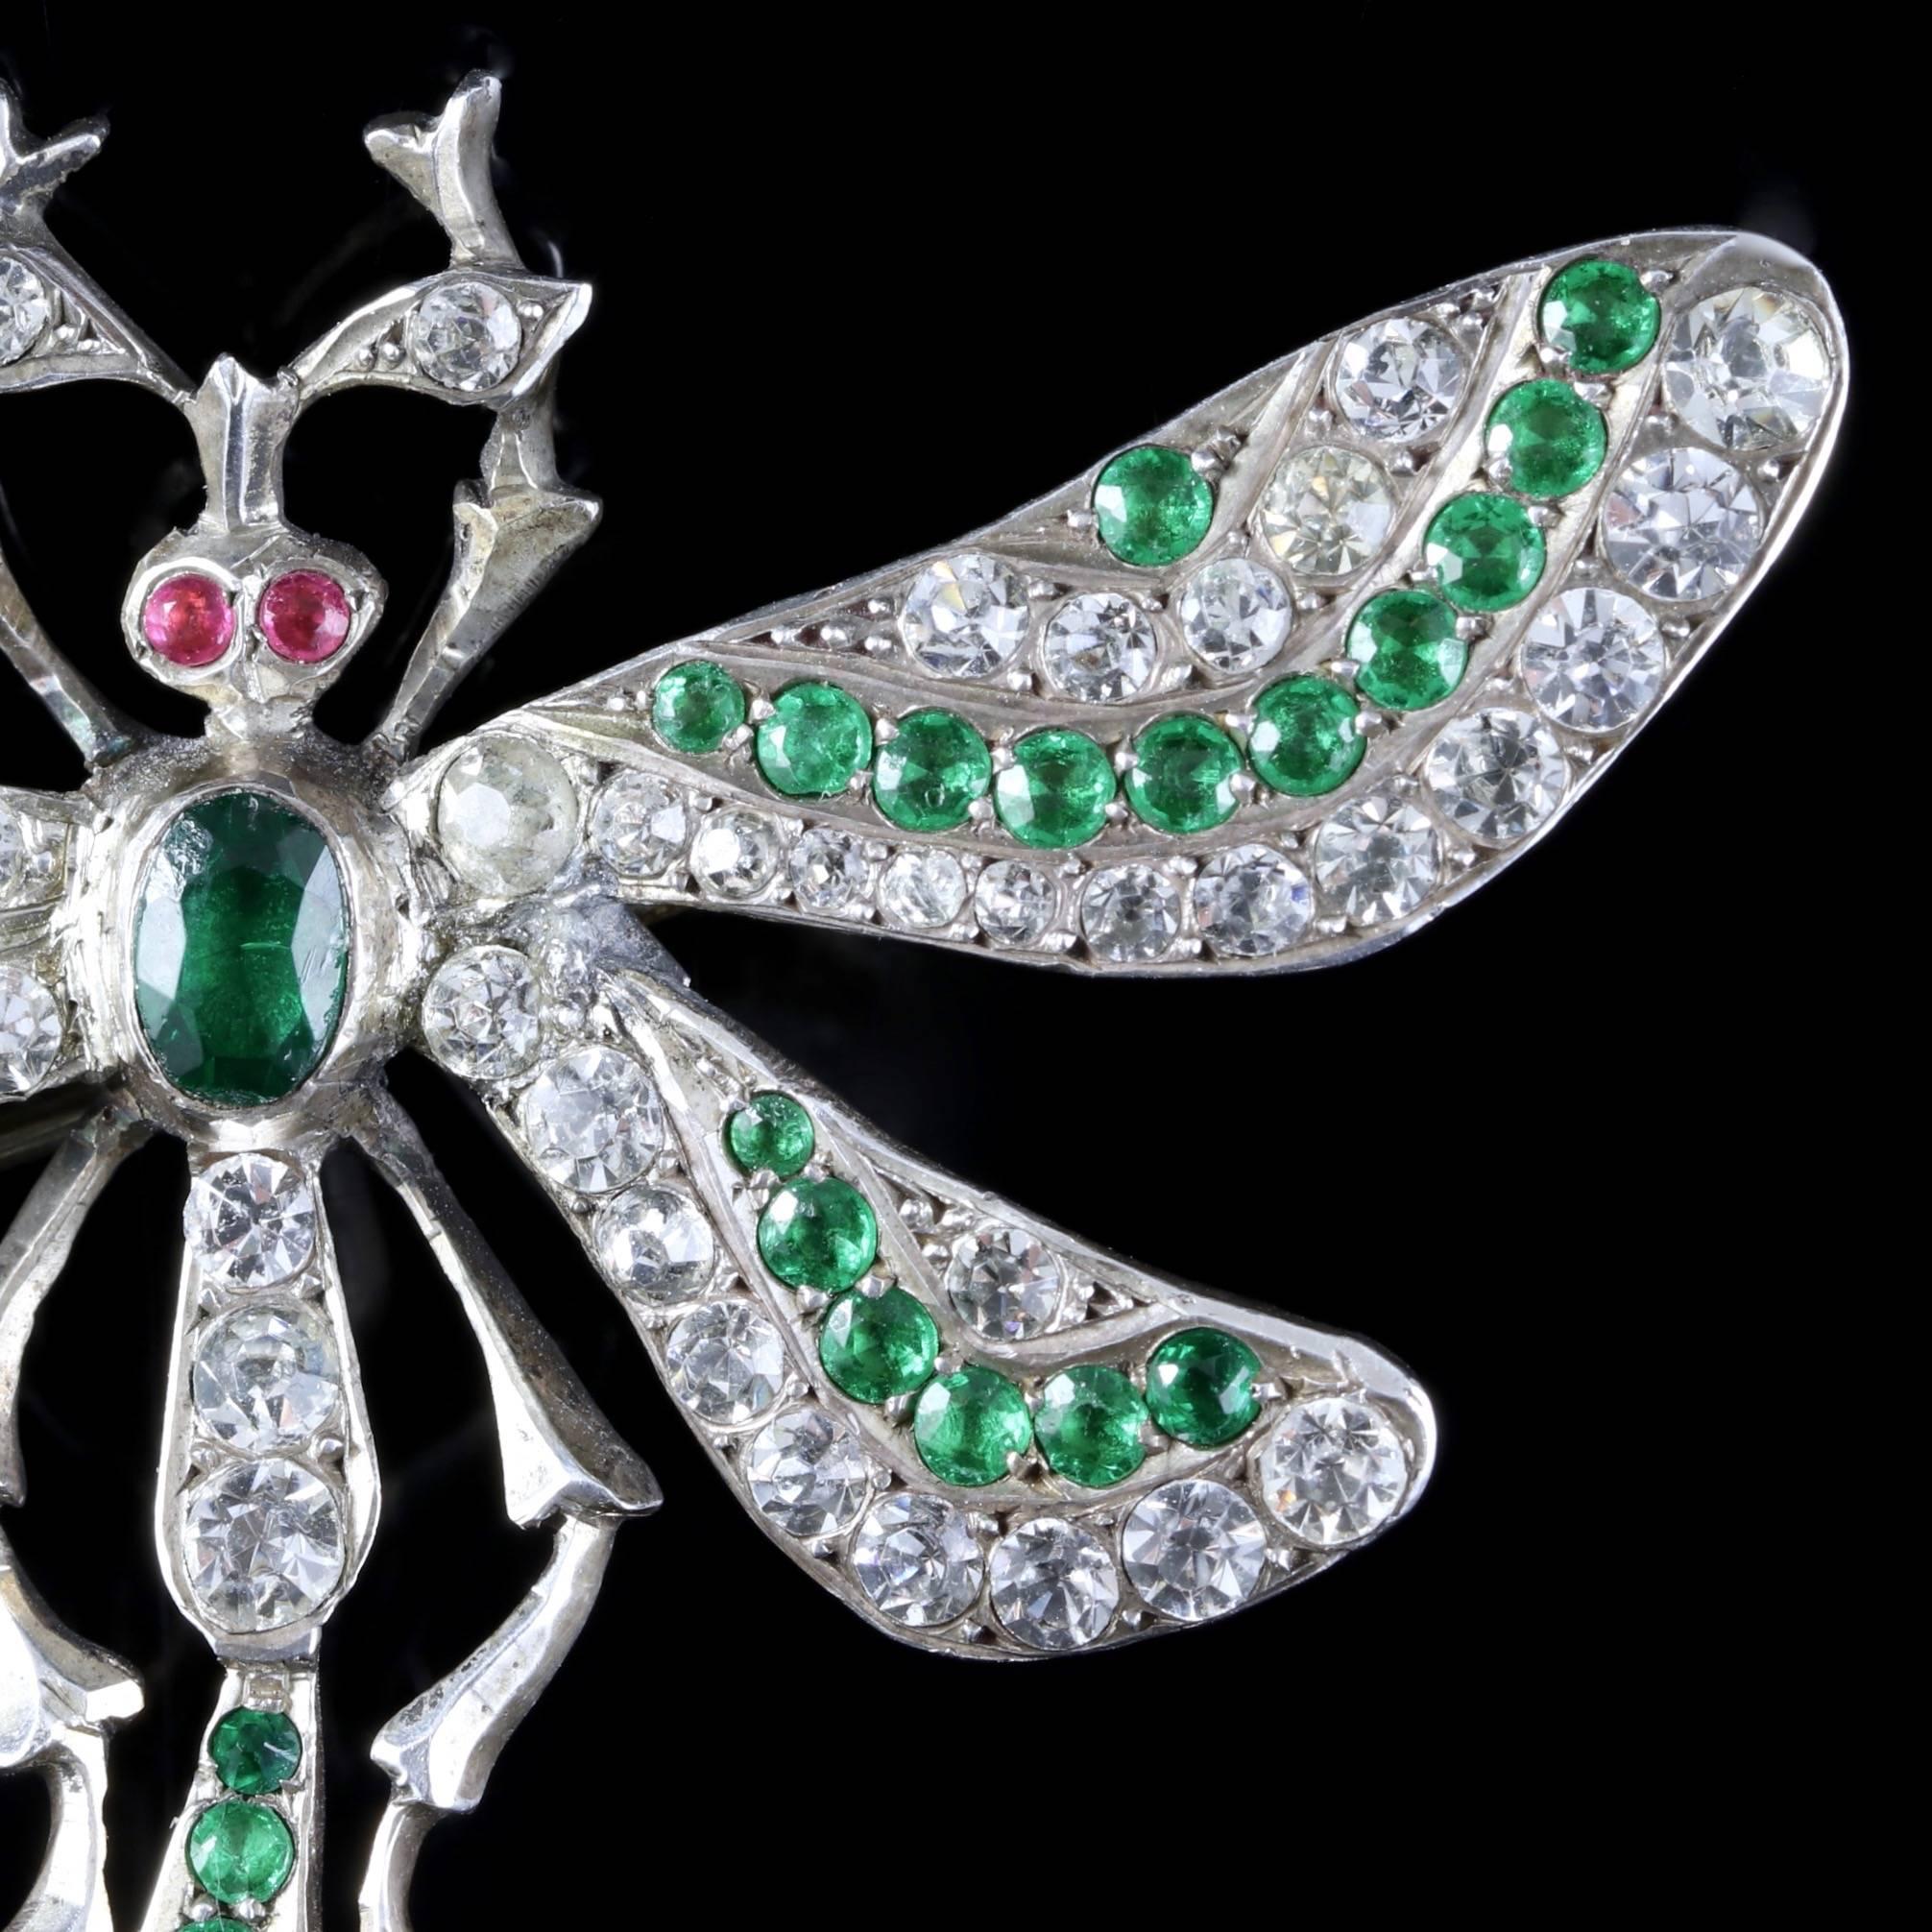 To read more please click continue reading below-

This fabulous antique Victorian Sterling Silver dragonfly brooch is genuine Victorian Circa 1900. 

Dragonfly or insect jewellery is highly collectable and was once a symbol of good luck to the